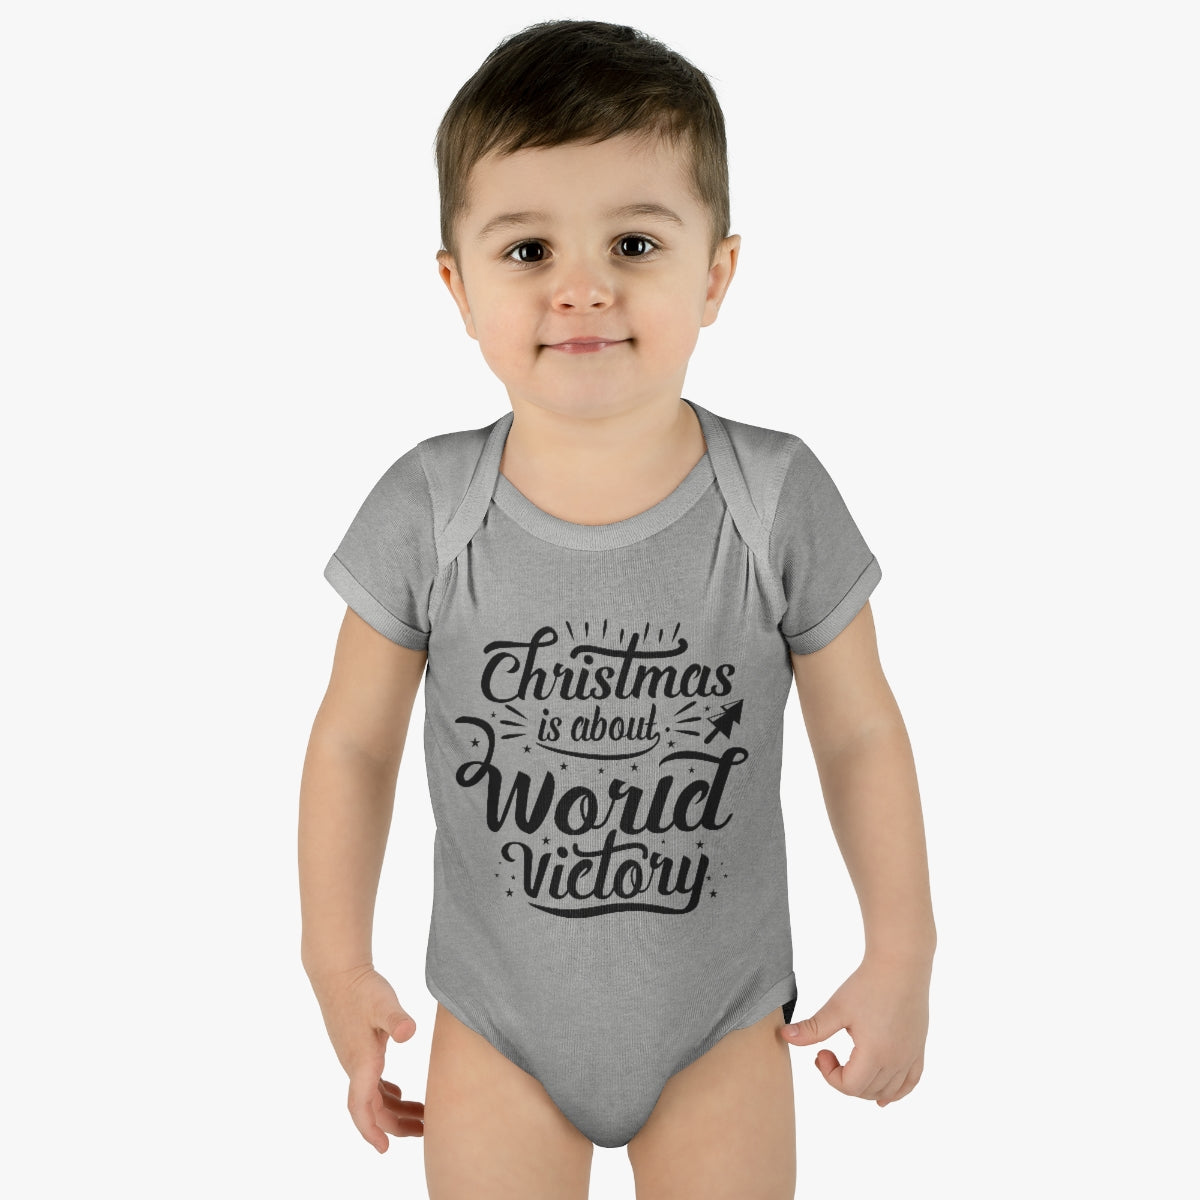 Christmas is about Hope victory Baby Bodysuit, Merry Christmas, Christmas Baby Bodysuit, Infant Bodysuit, Merry Christmas Baby Bodysuit